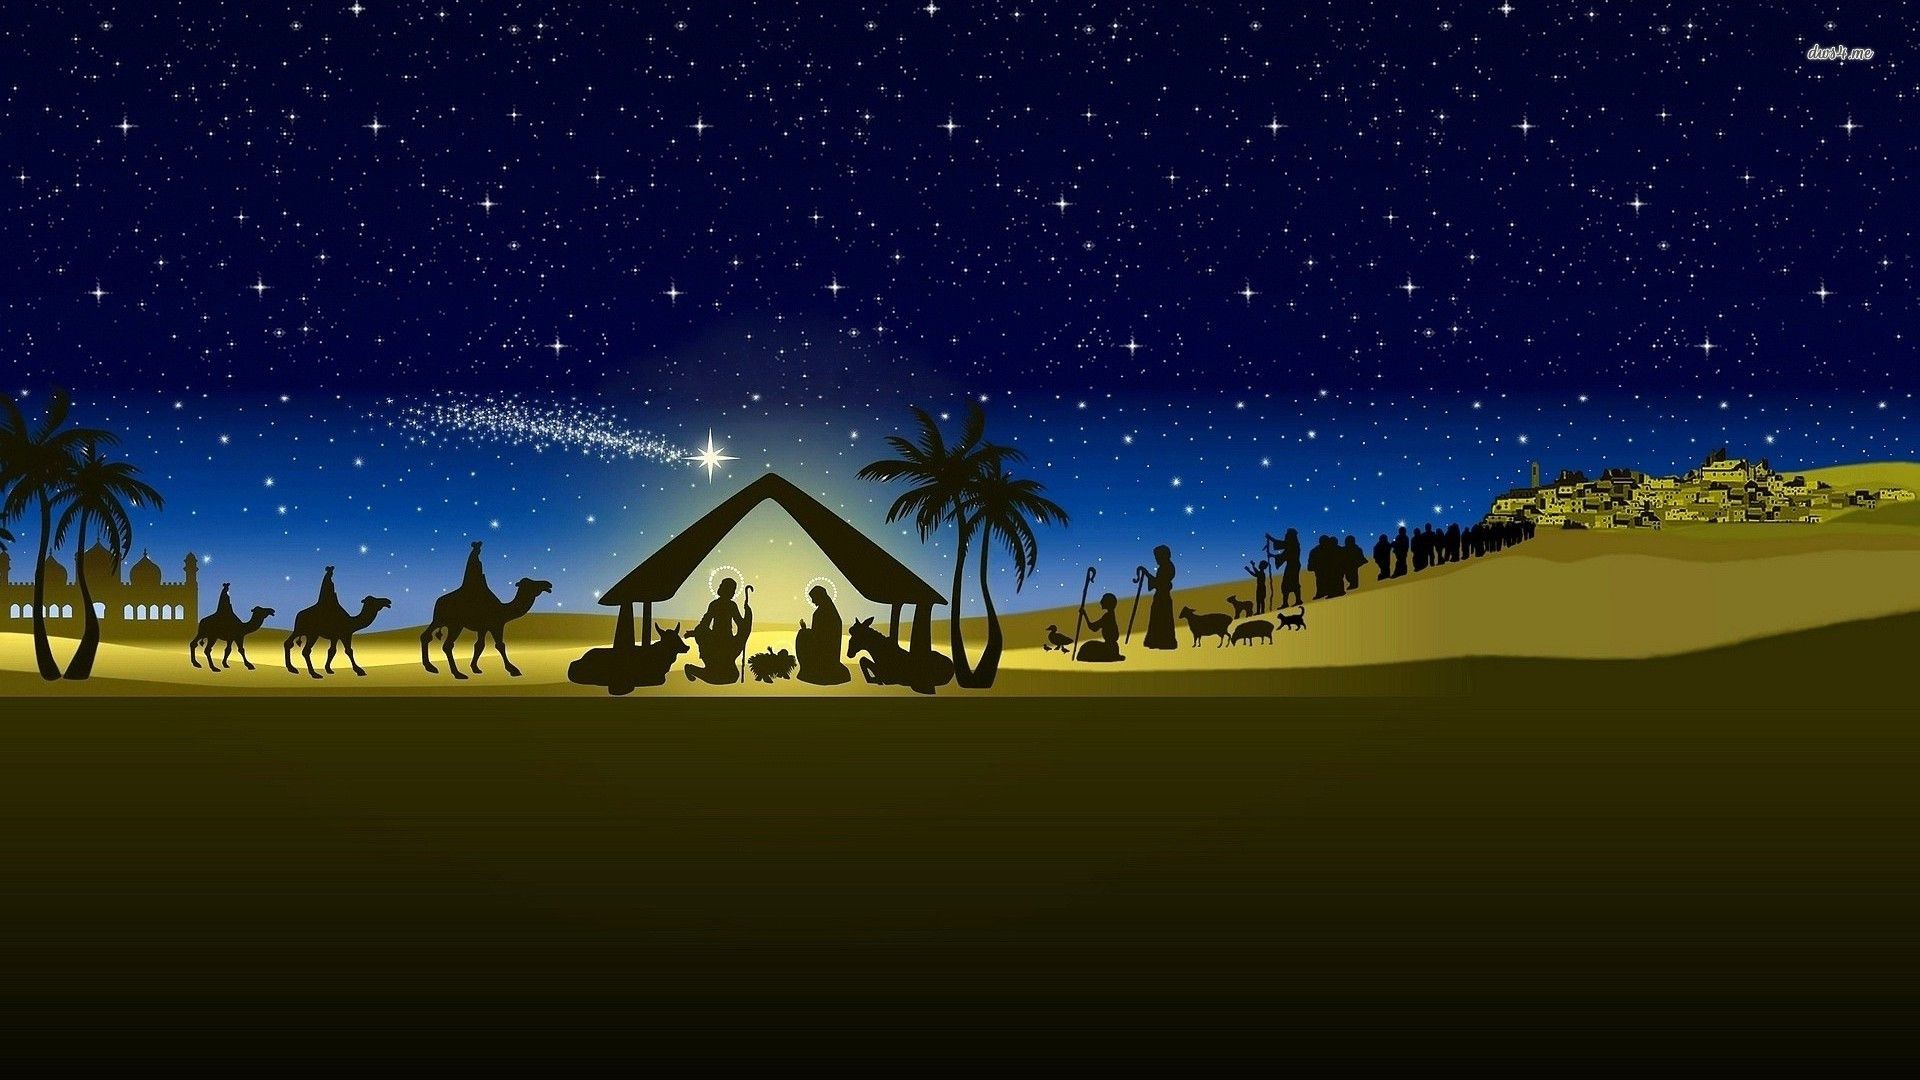 1920x1080 Nativity scene background pictures